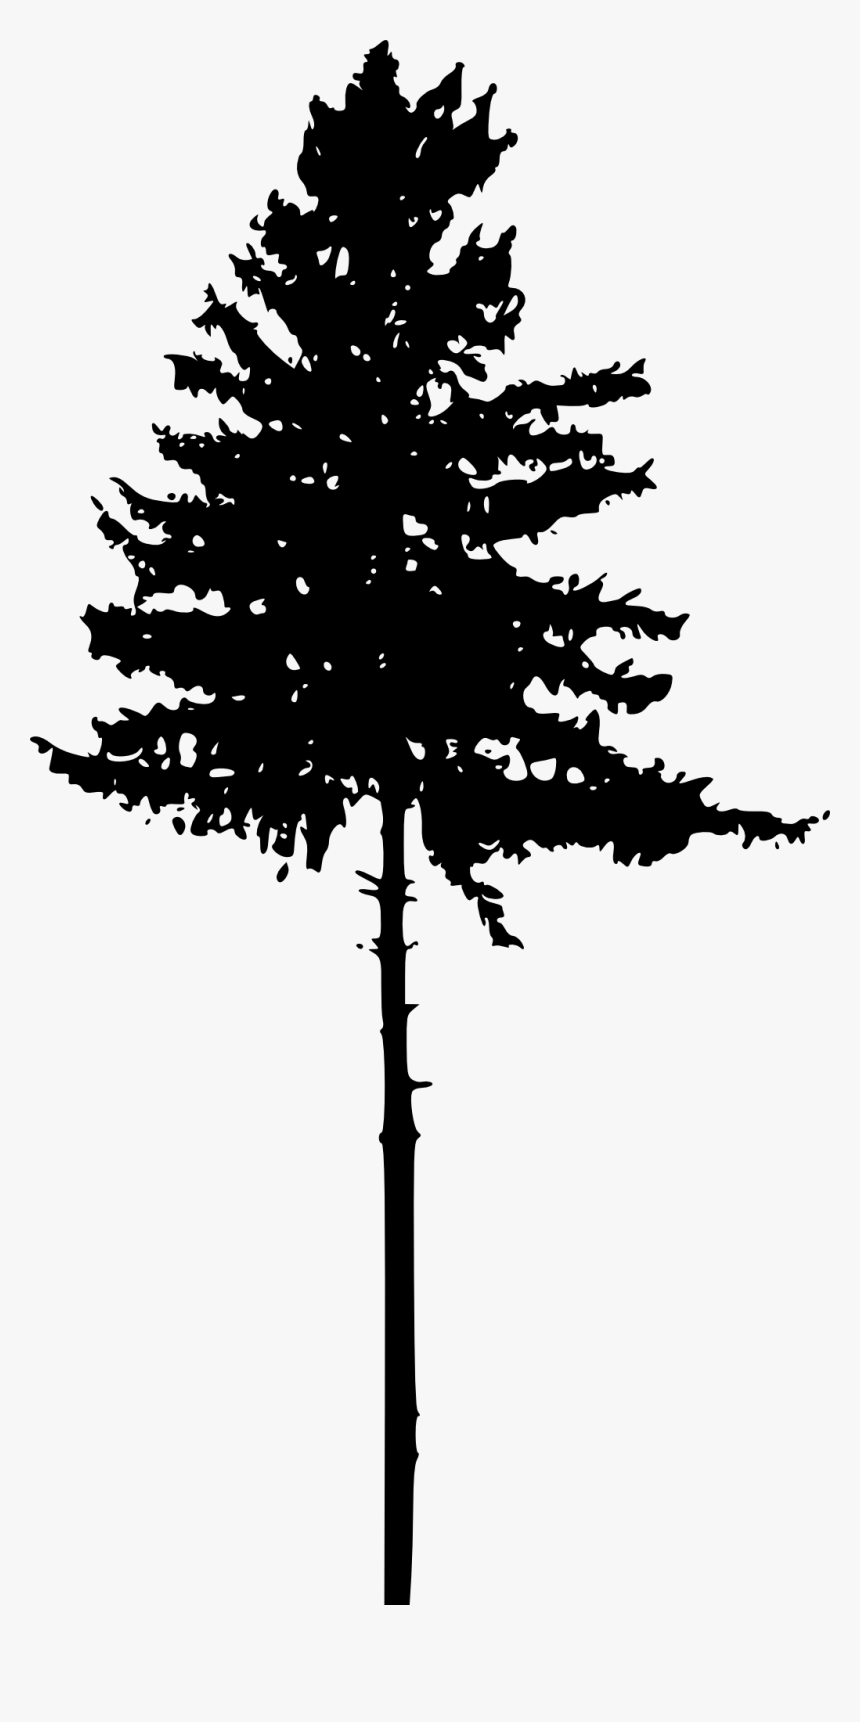 Tree Silhouette 2 - Silhouette Pine Tree Png, Transparent Png, Free Download